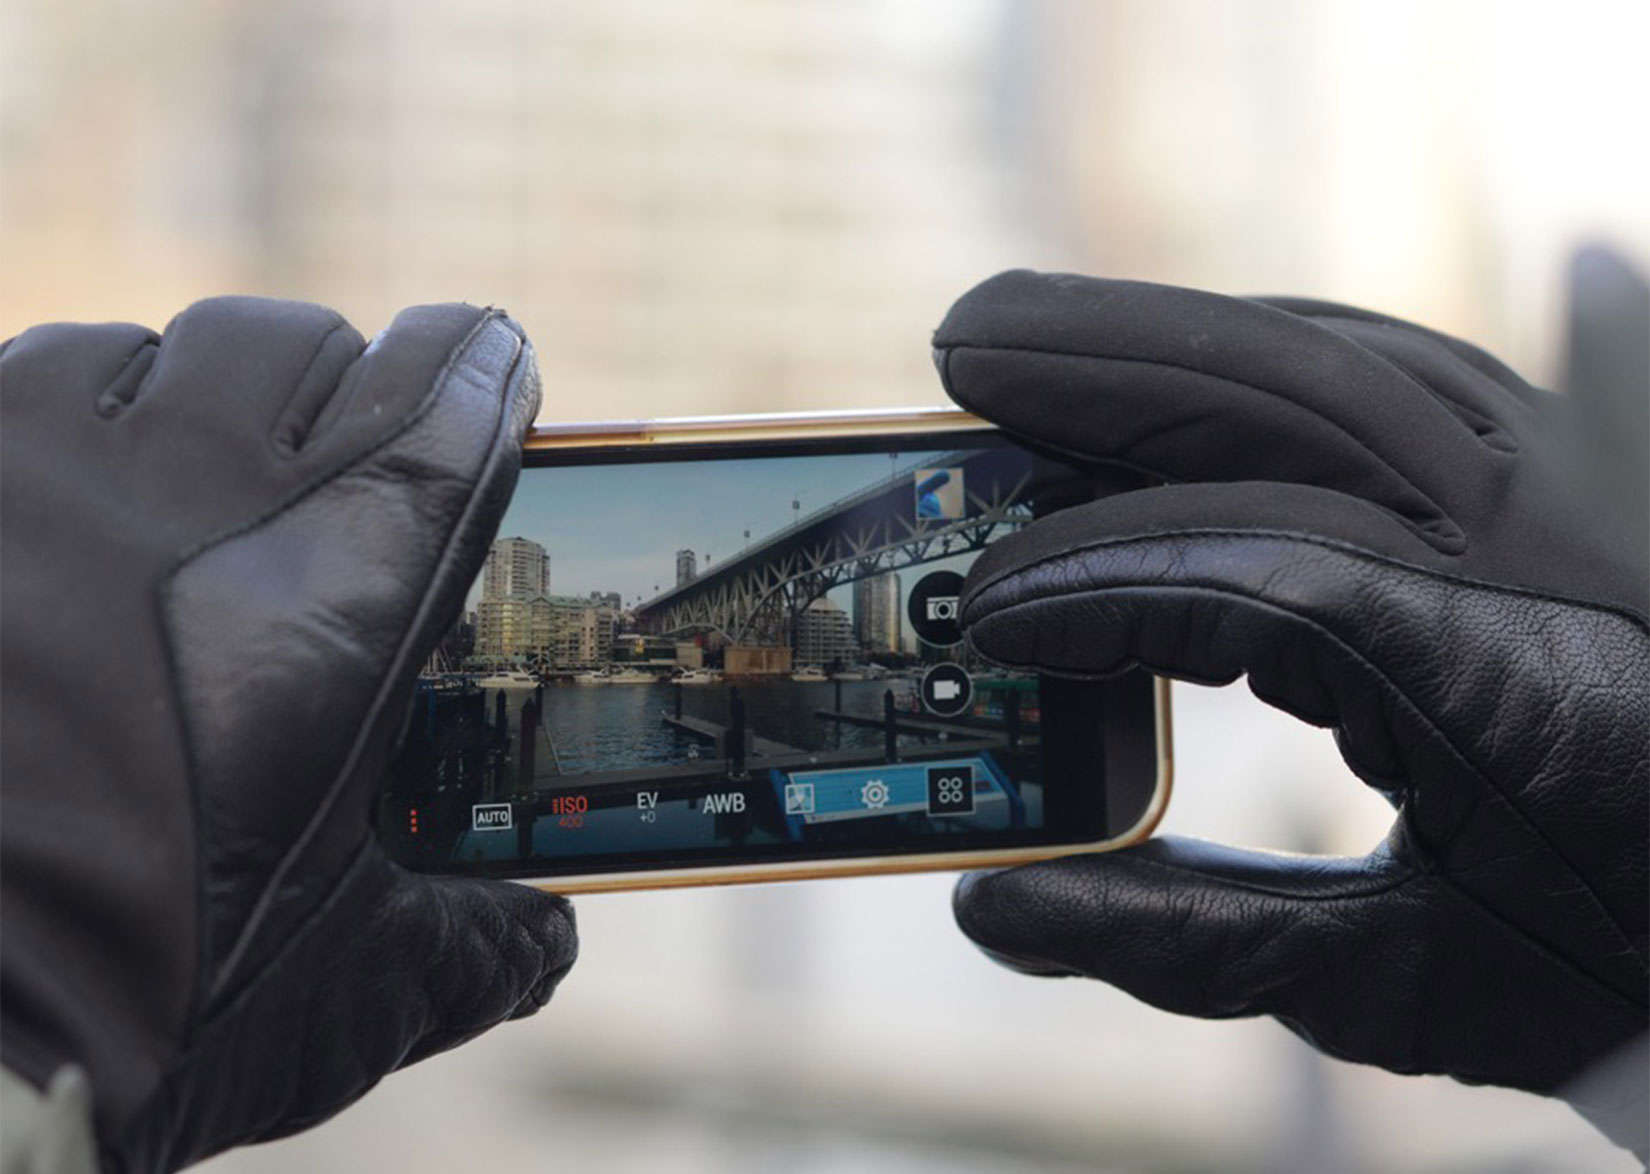 Nanotips will let you use your touchscreens in cold weather without having to remove your gloves.